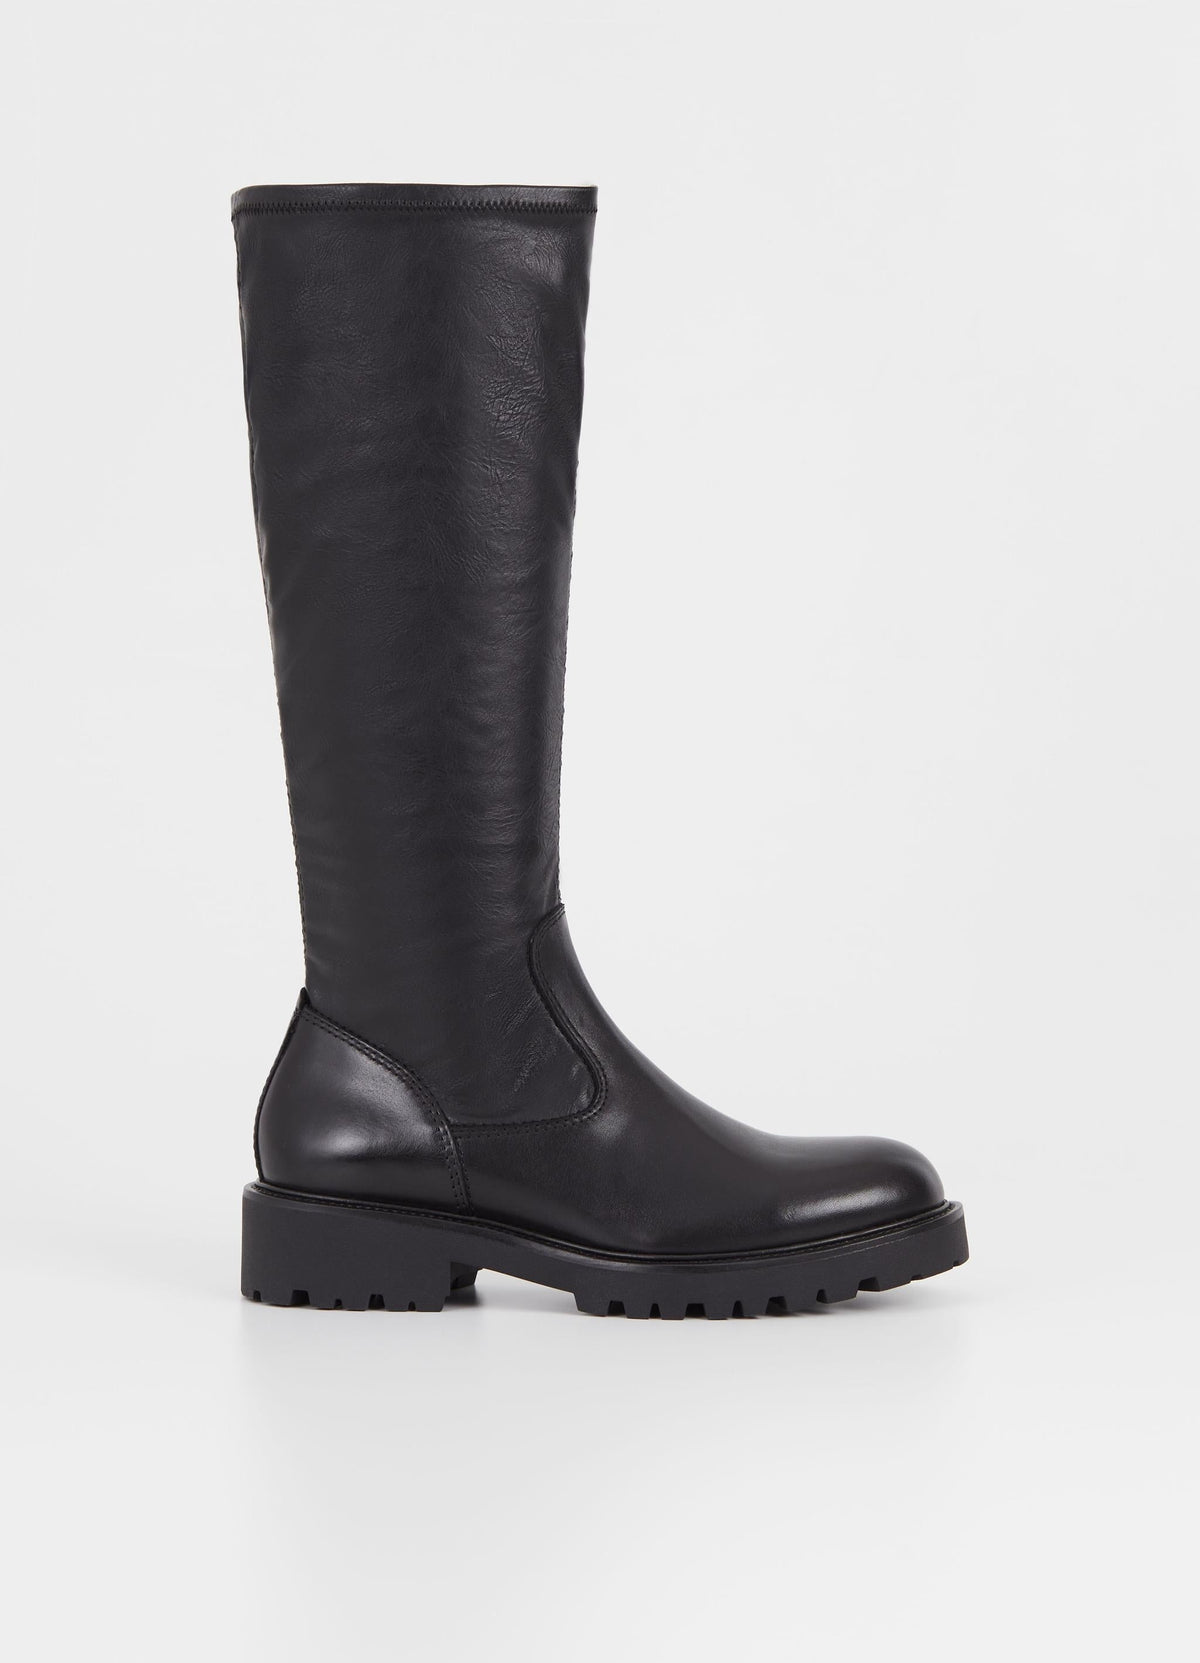 Knee high leather boot with side zip and rubber sole